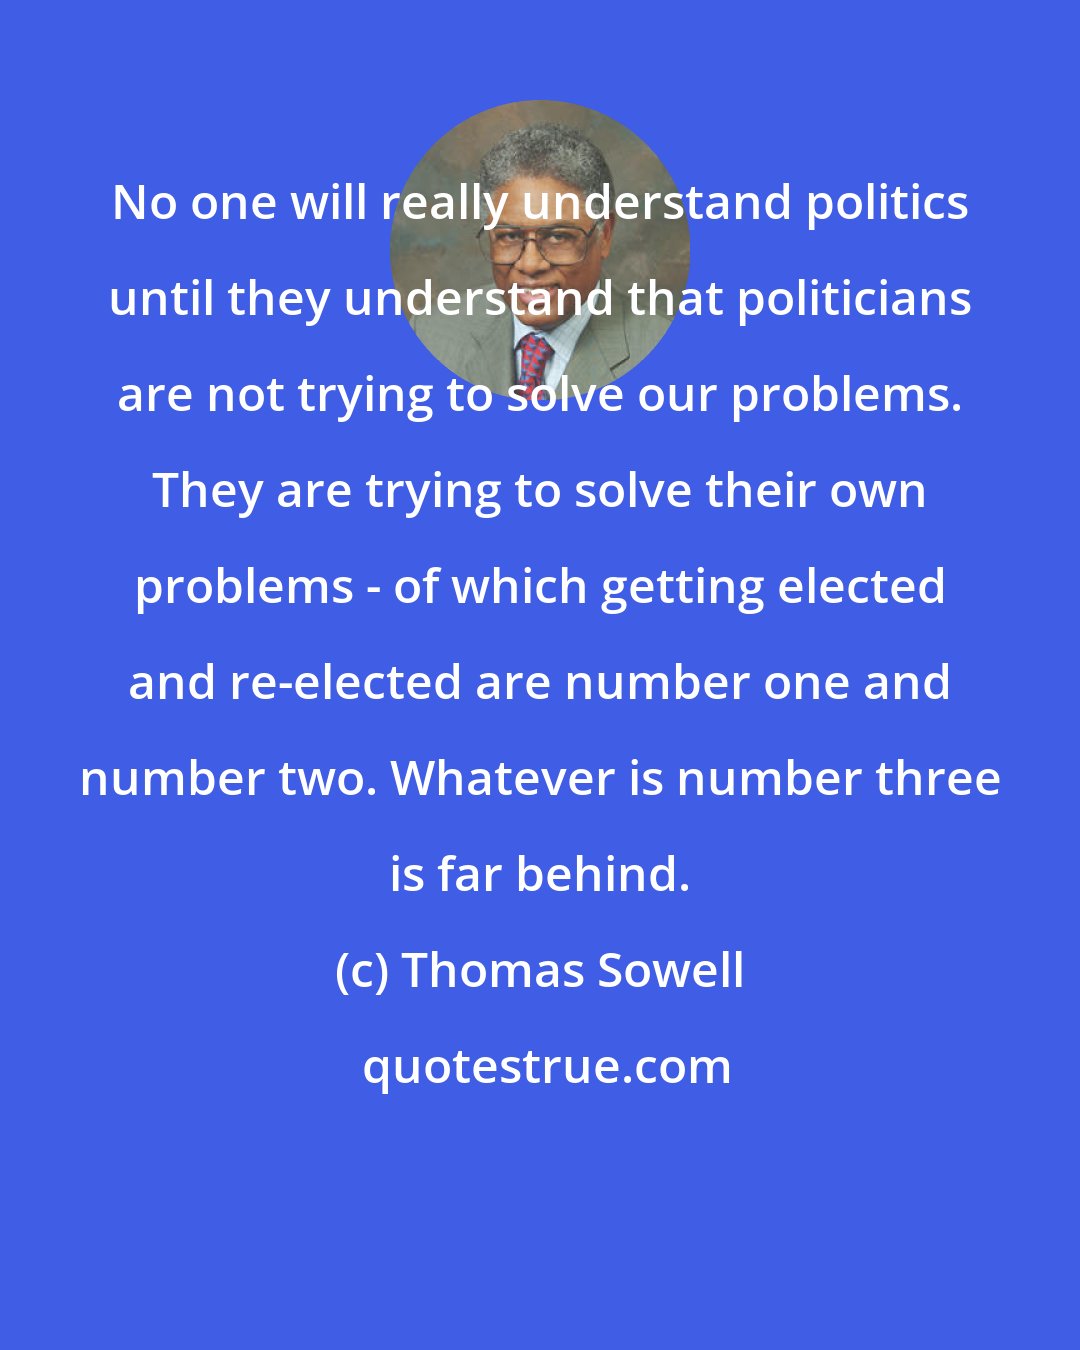 Thomas Sowell: No one will really understand politics until they understand that politicians are not trying to solve our problems. They are trying to solve their own problems - of which getting elected and re-elected are number one and number two. Whatever is number three is far behind.